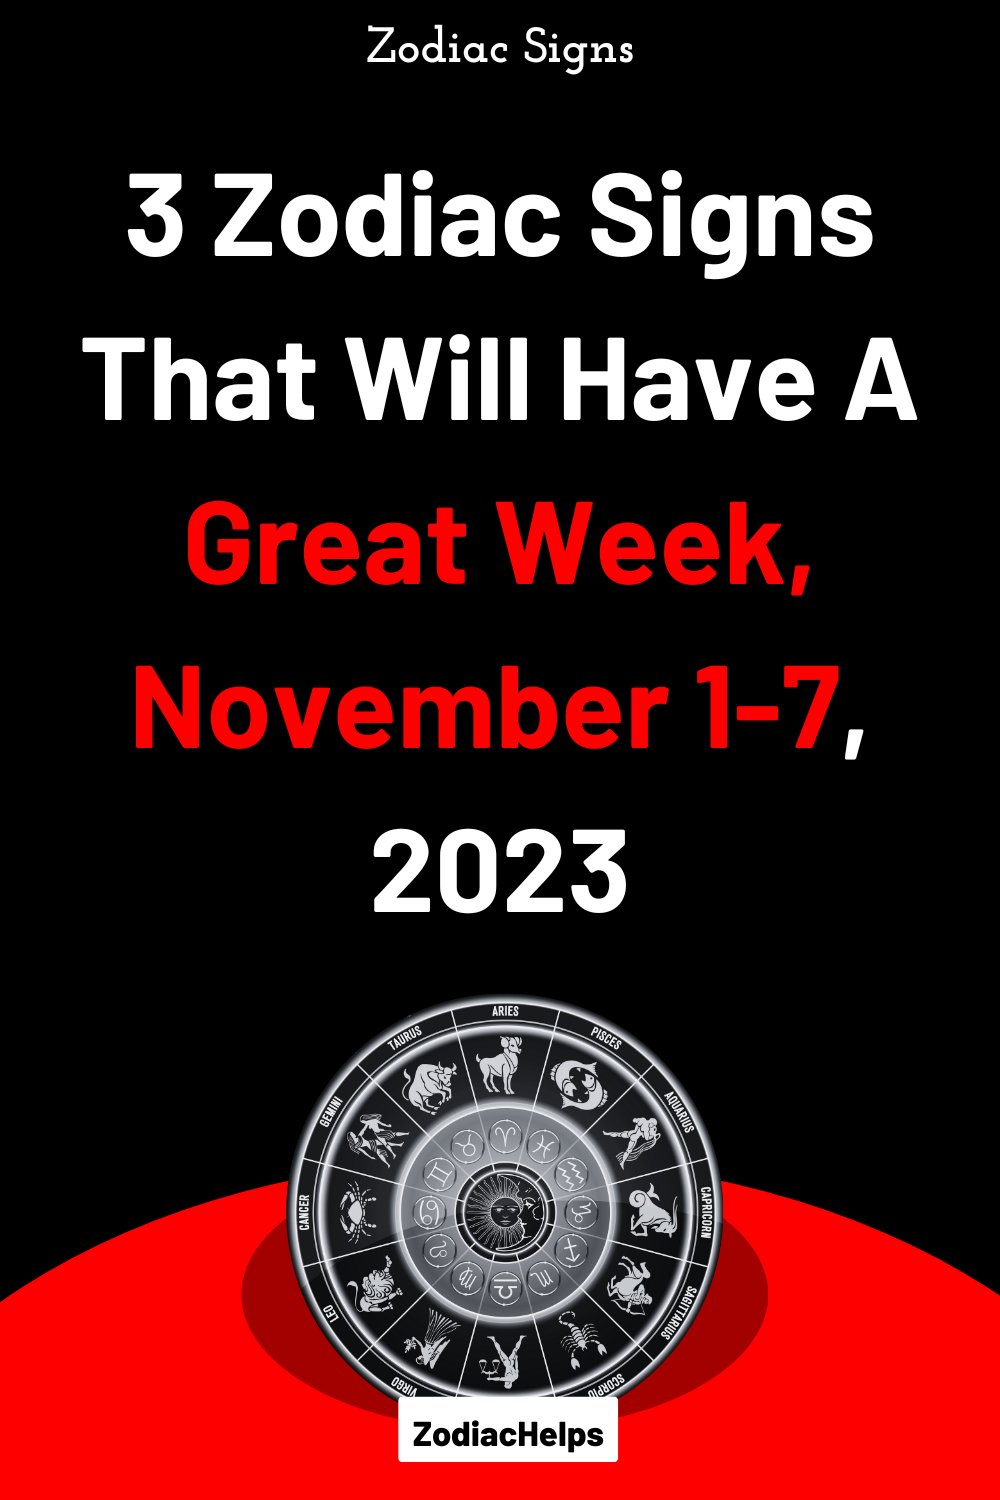 3 Zodiac Signs That Will Have A Great Week, November 1-7, 2023